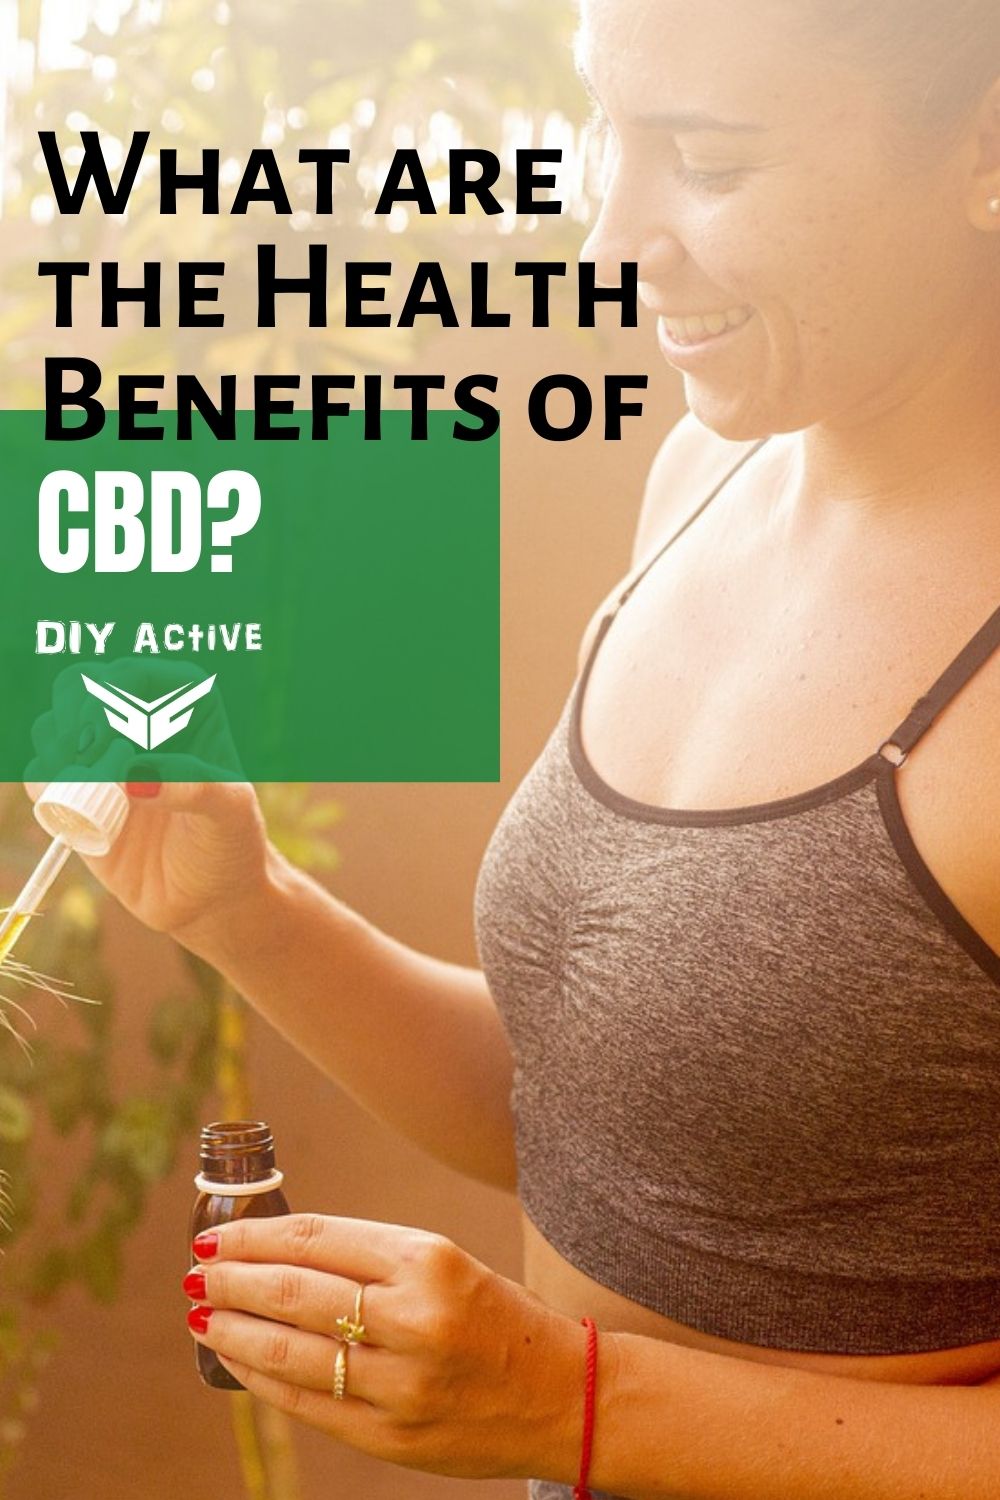 What are the Health Benefits of CBD?